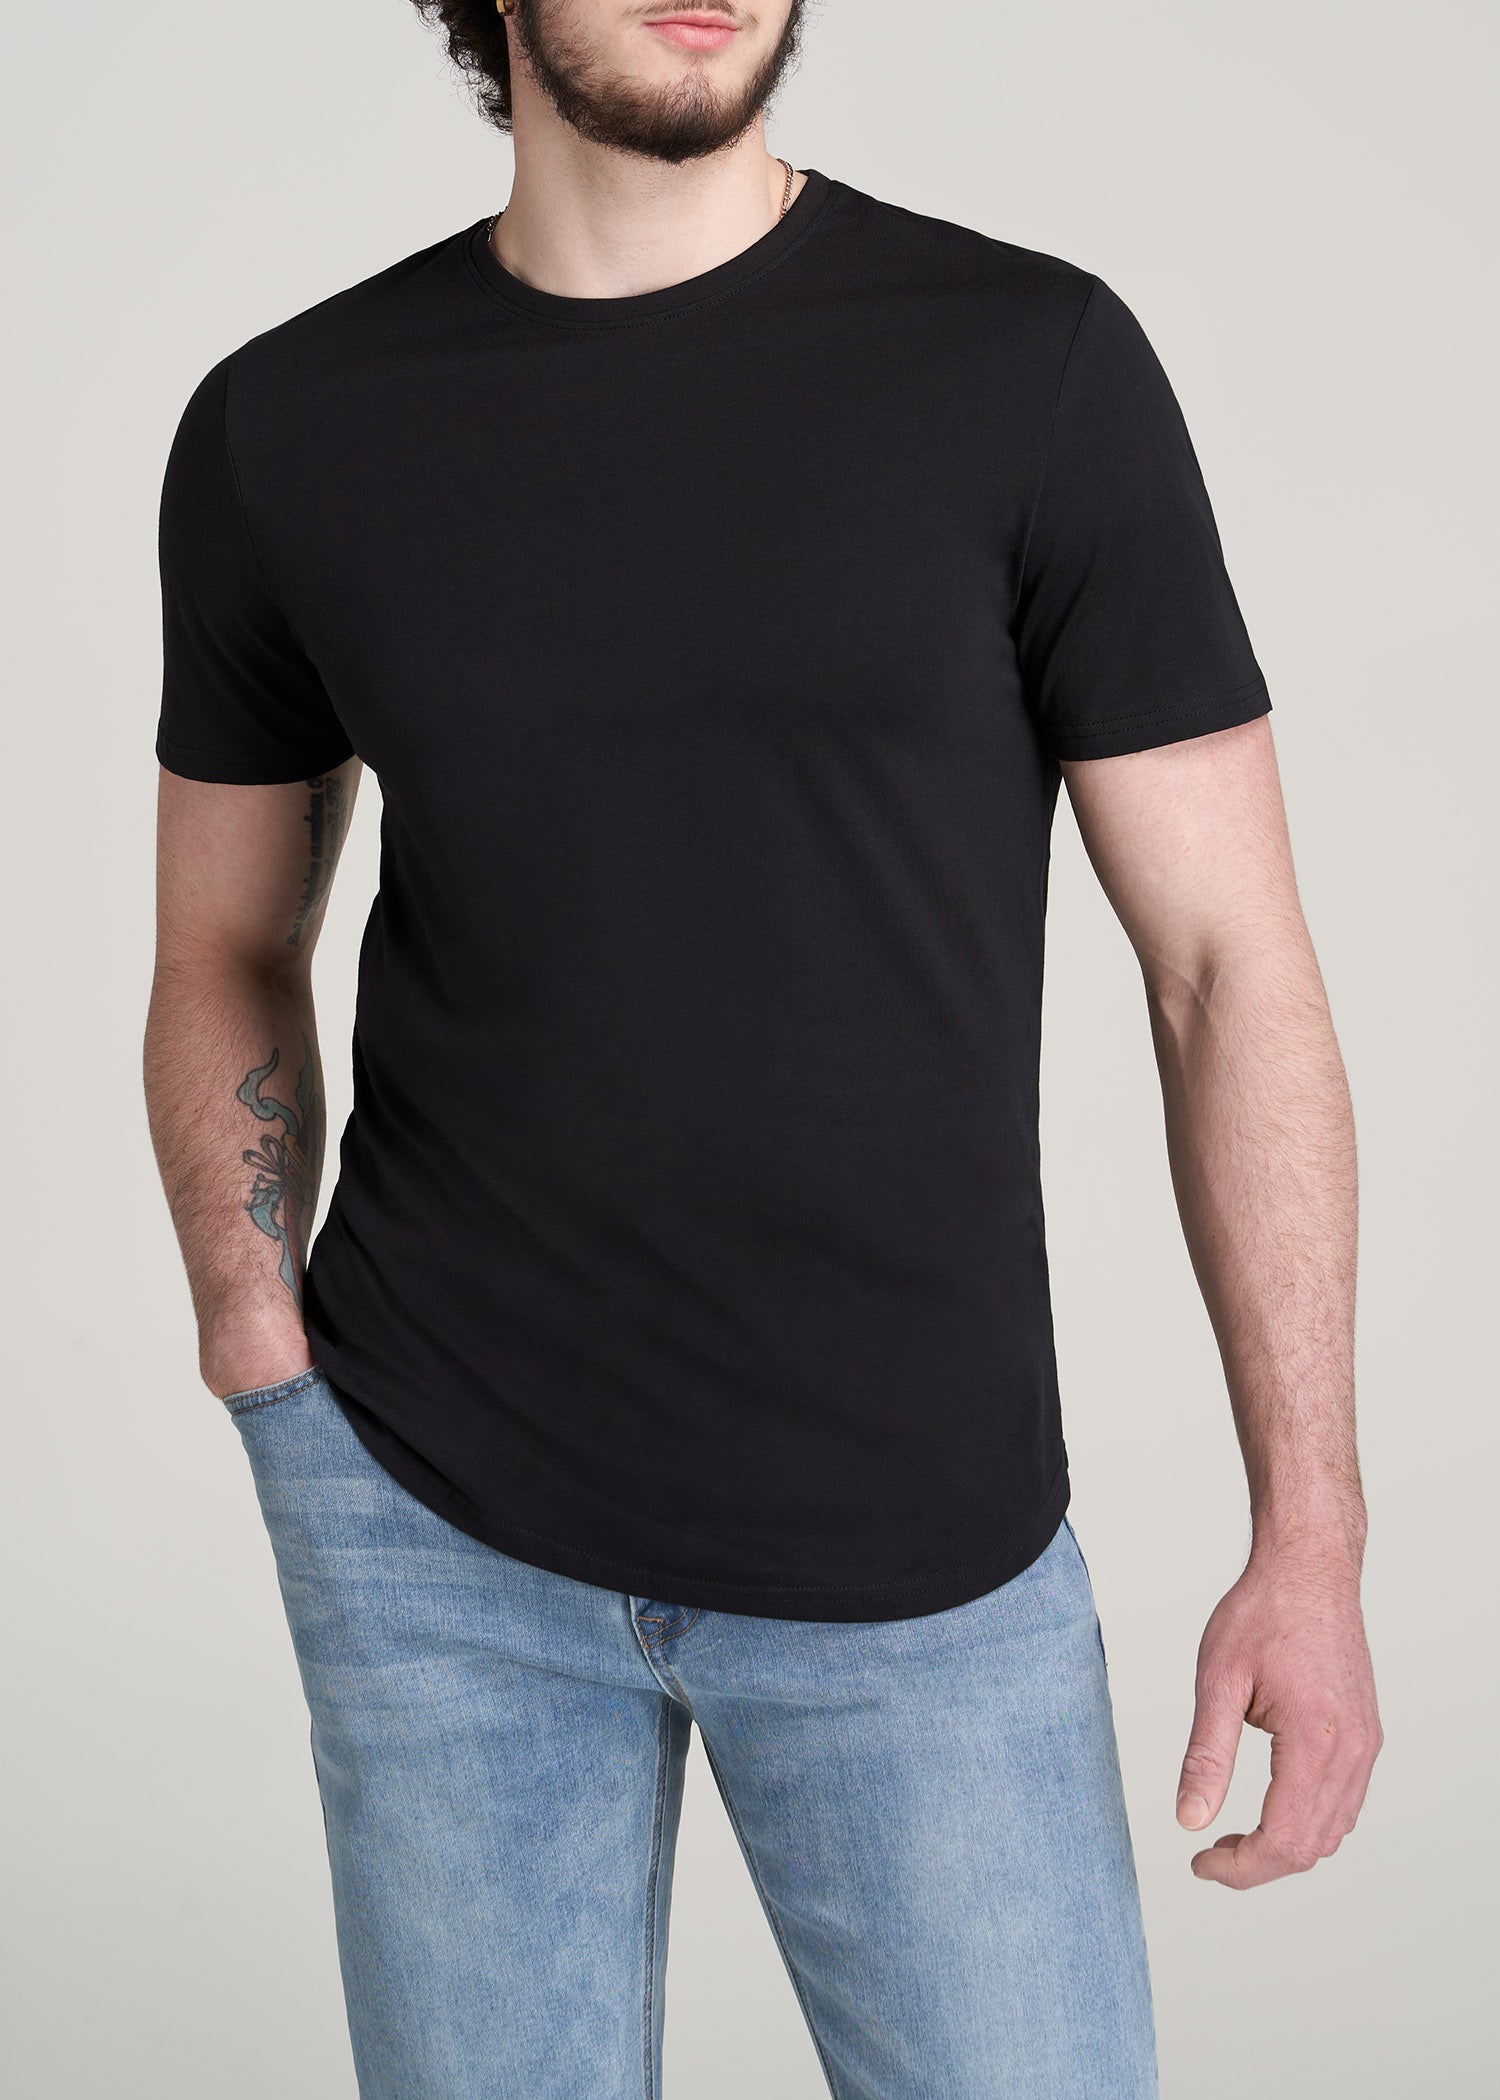 Basic Grey Fitted Scoop Neck T Shirt